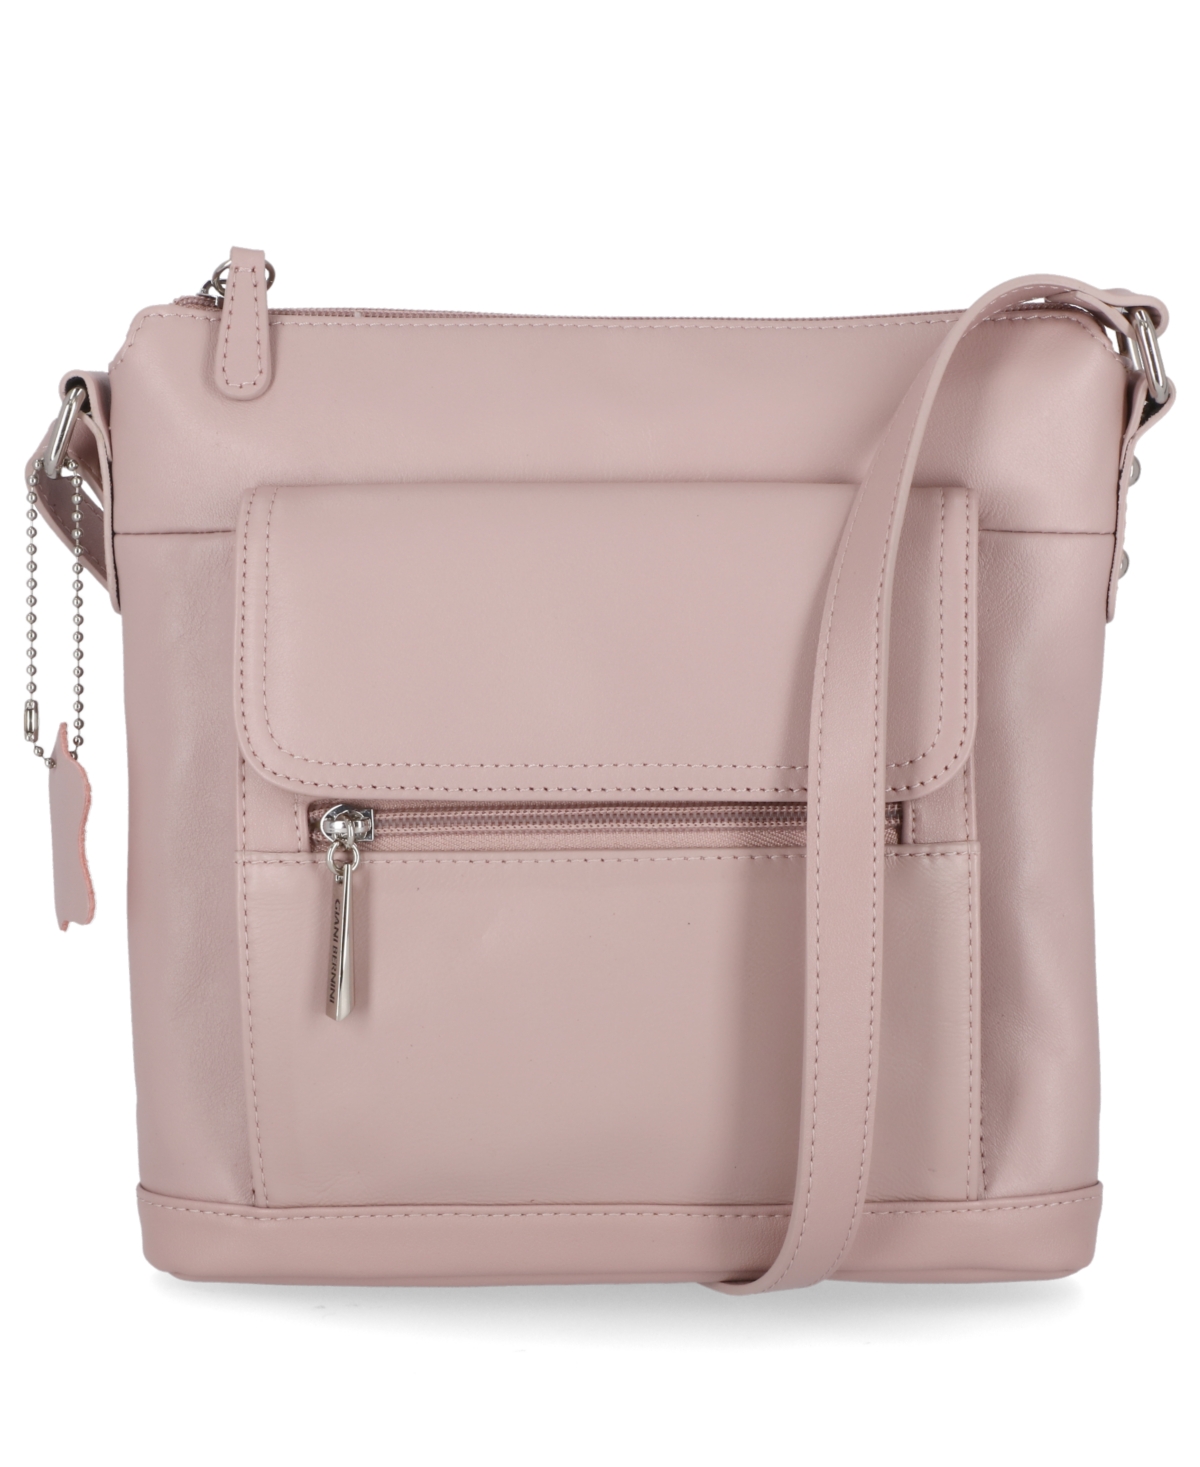 Nappa Leather Venice Crossbody, Created for Macy's - Rose/Silver